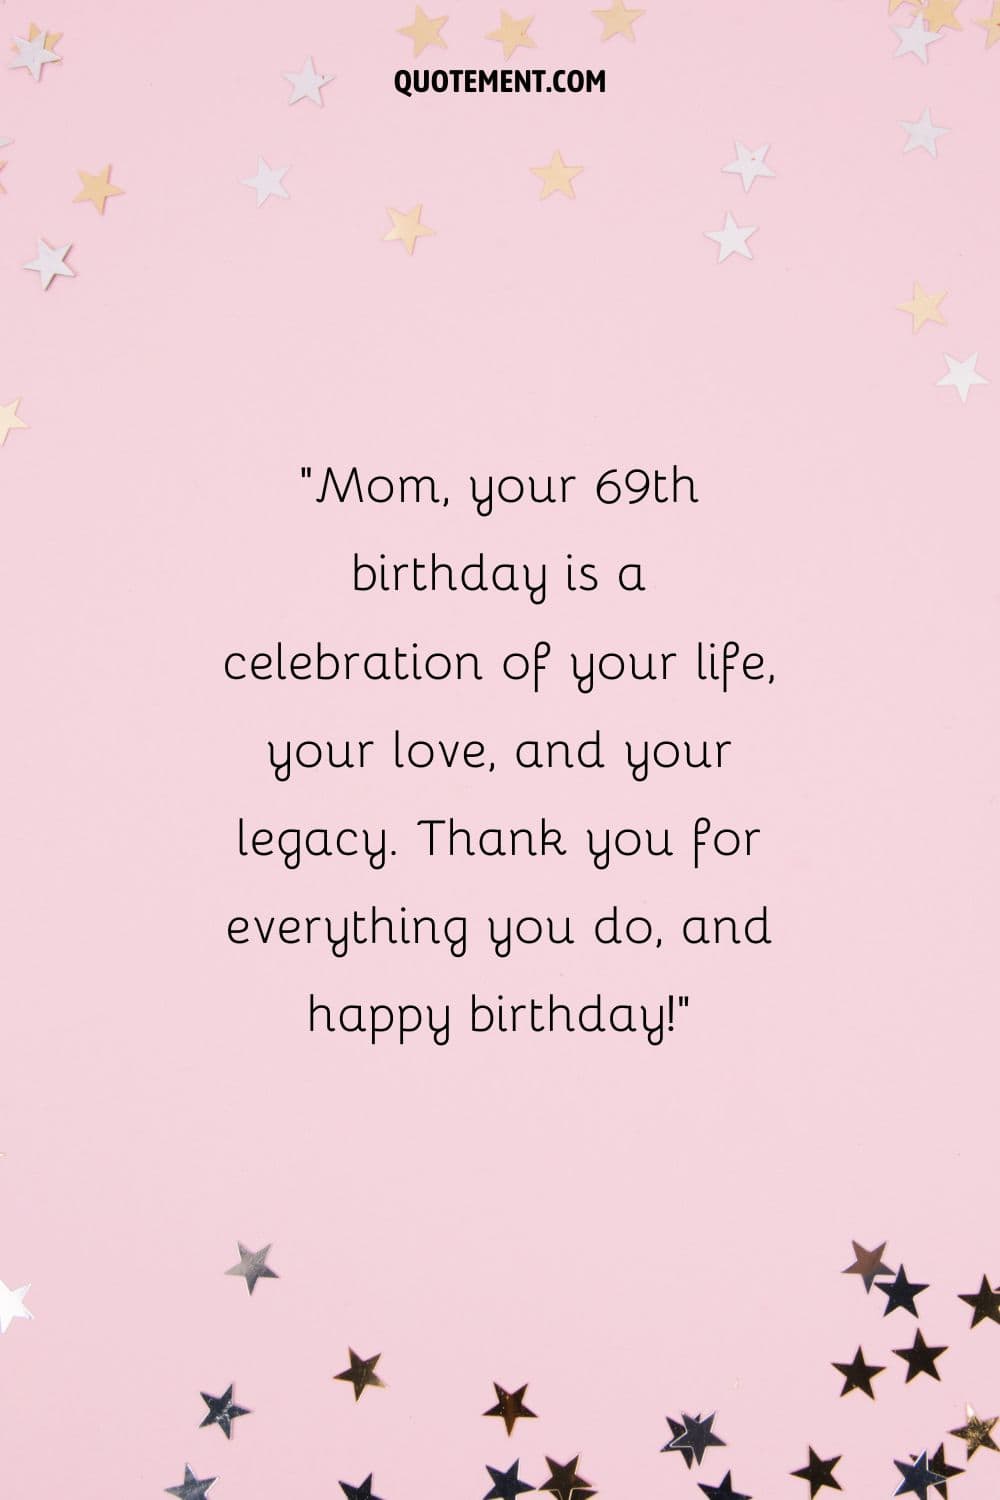 Mom, your 69th birthday is a celebration of your life, your love, and your legacy. Thank you for everything you do, and happy birthday!